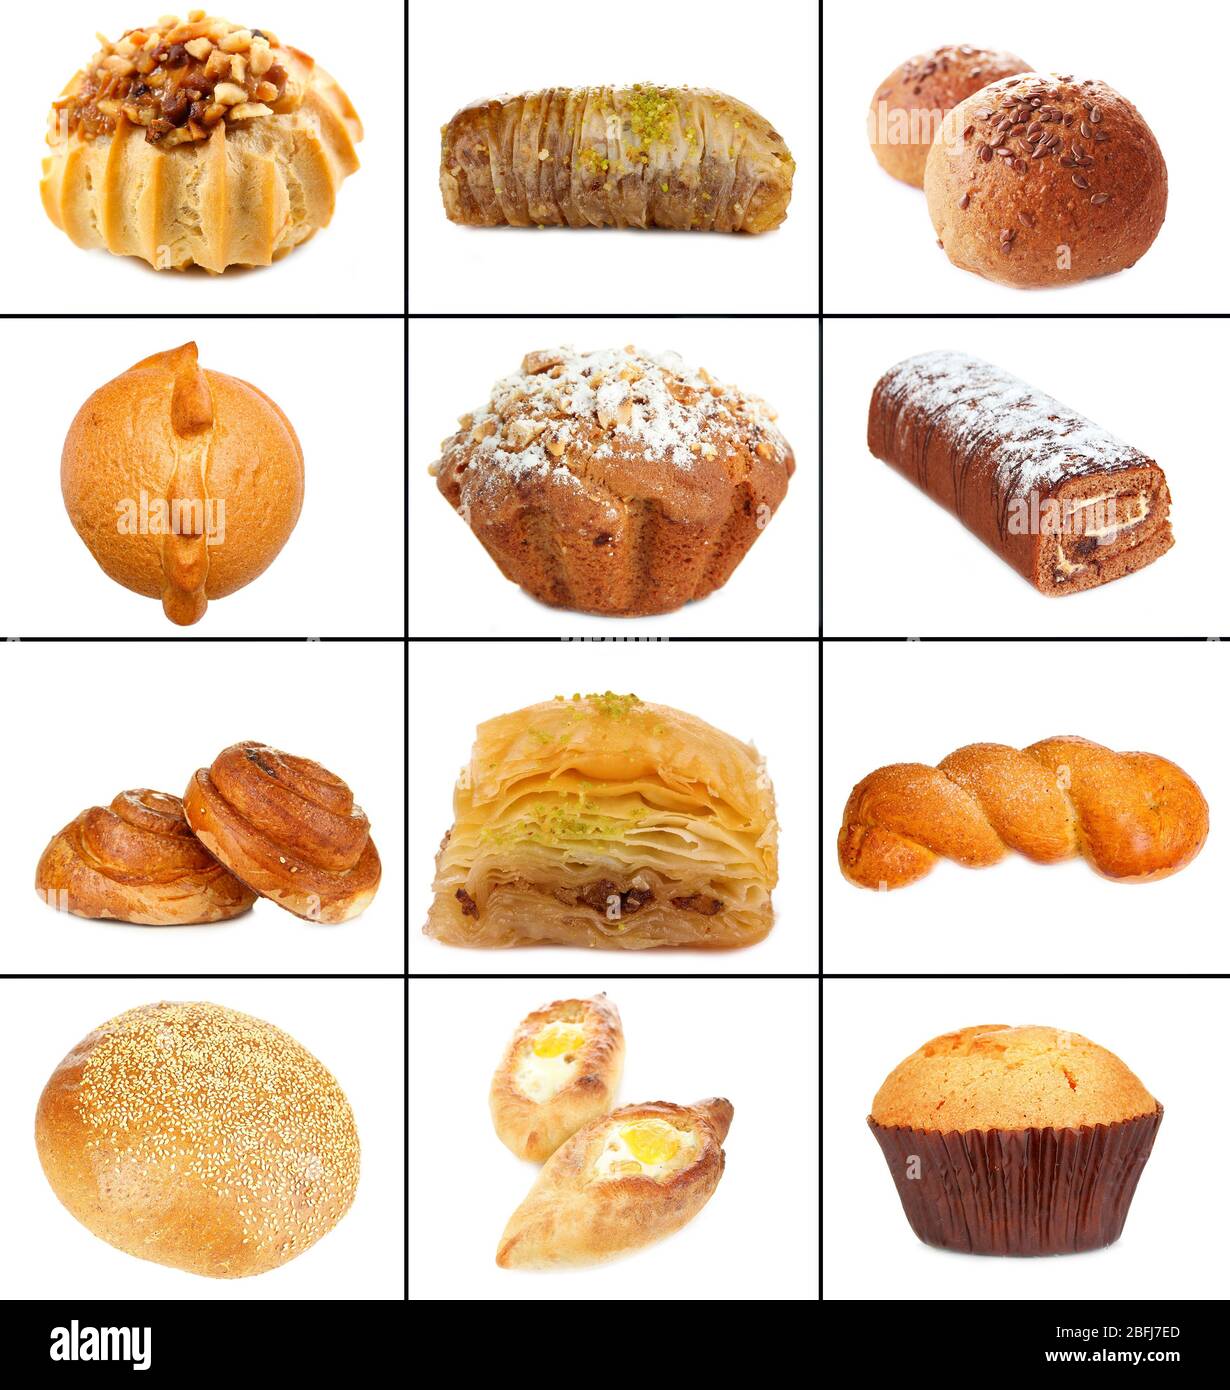 Collage of different pastries and bakery items, isolated on white Stock Photo